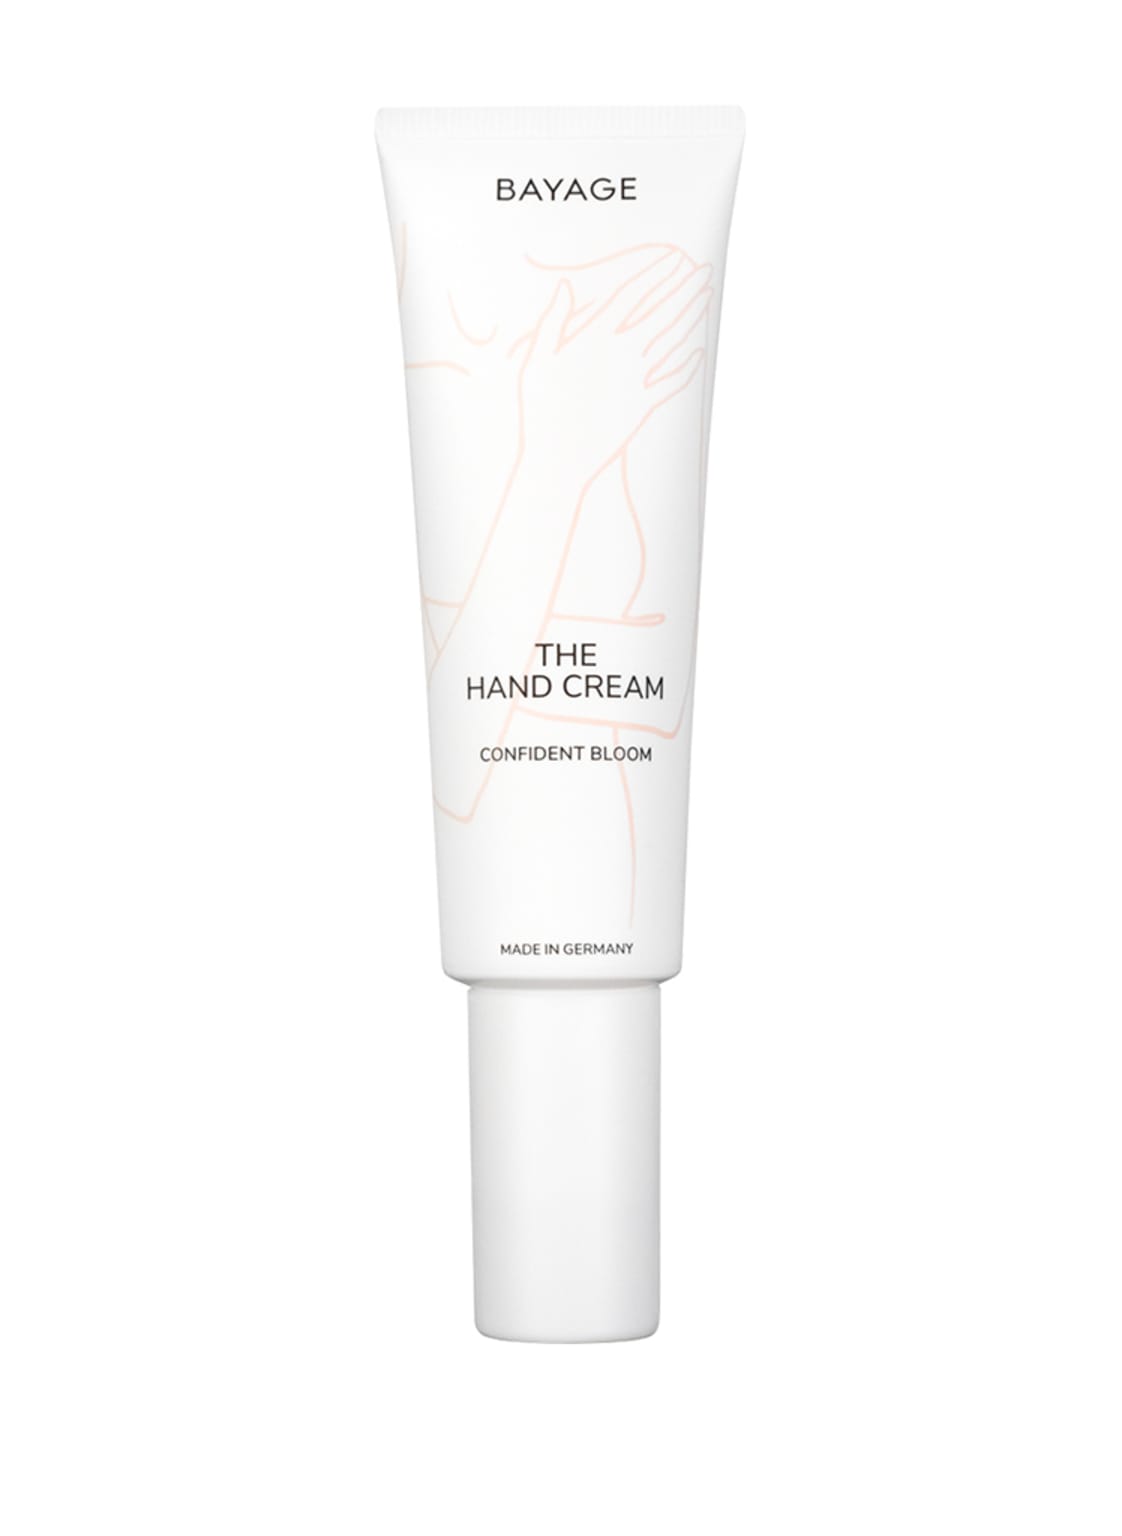 Image of Bayage The Hand Cream Confident Bloom 50 ml